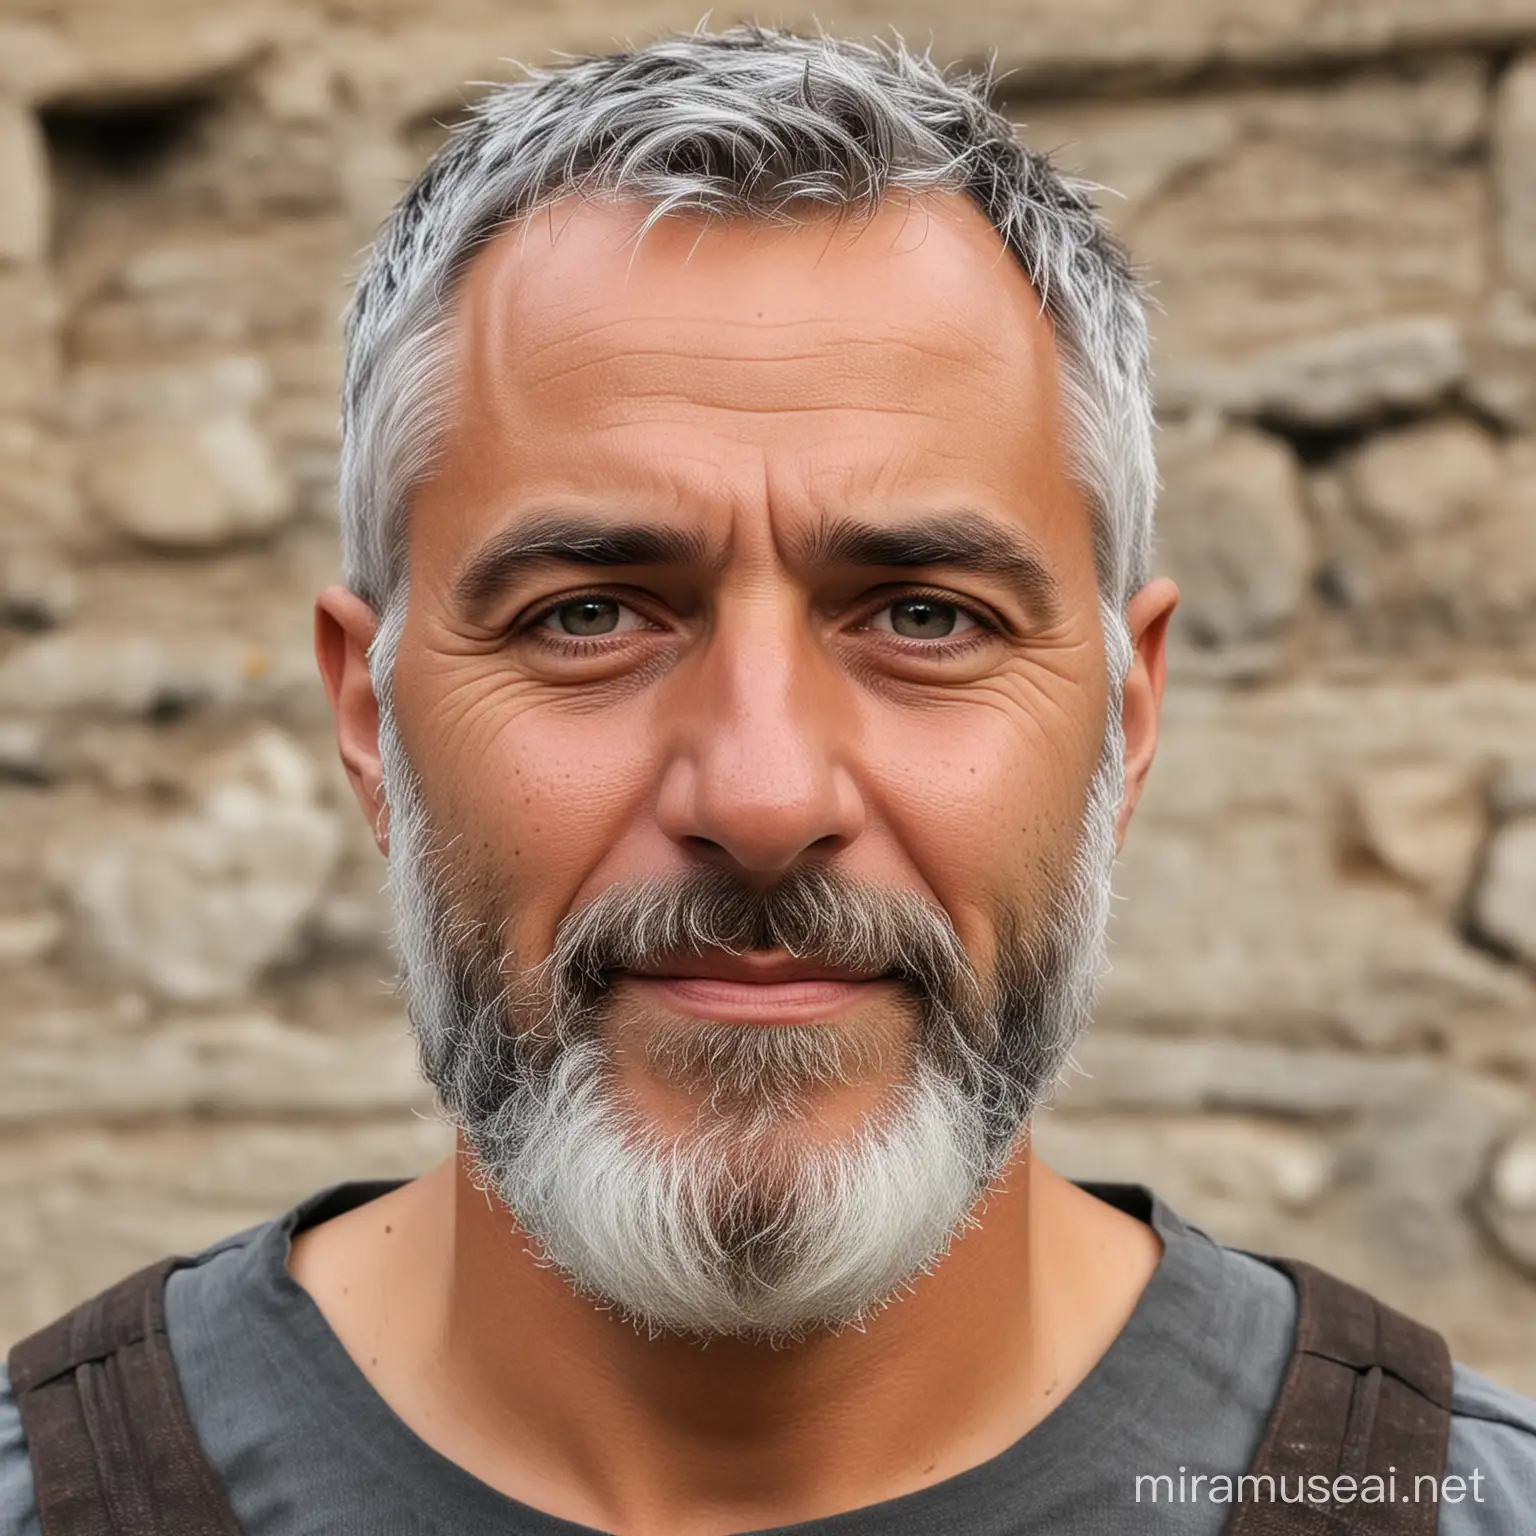 historical roman 40 years old guy with some grey hair only beard no moustache